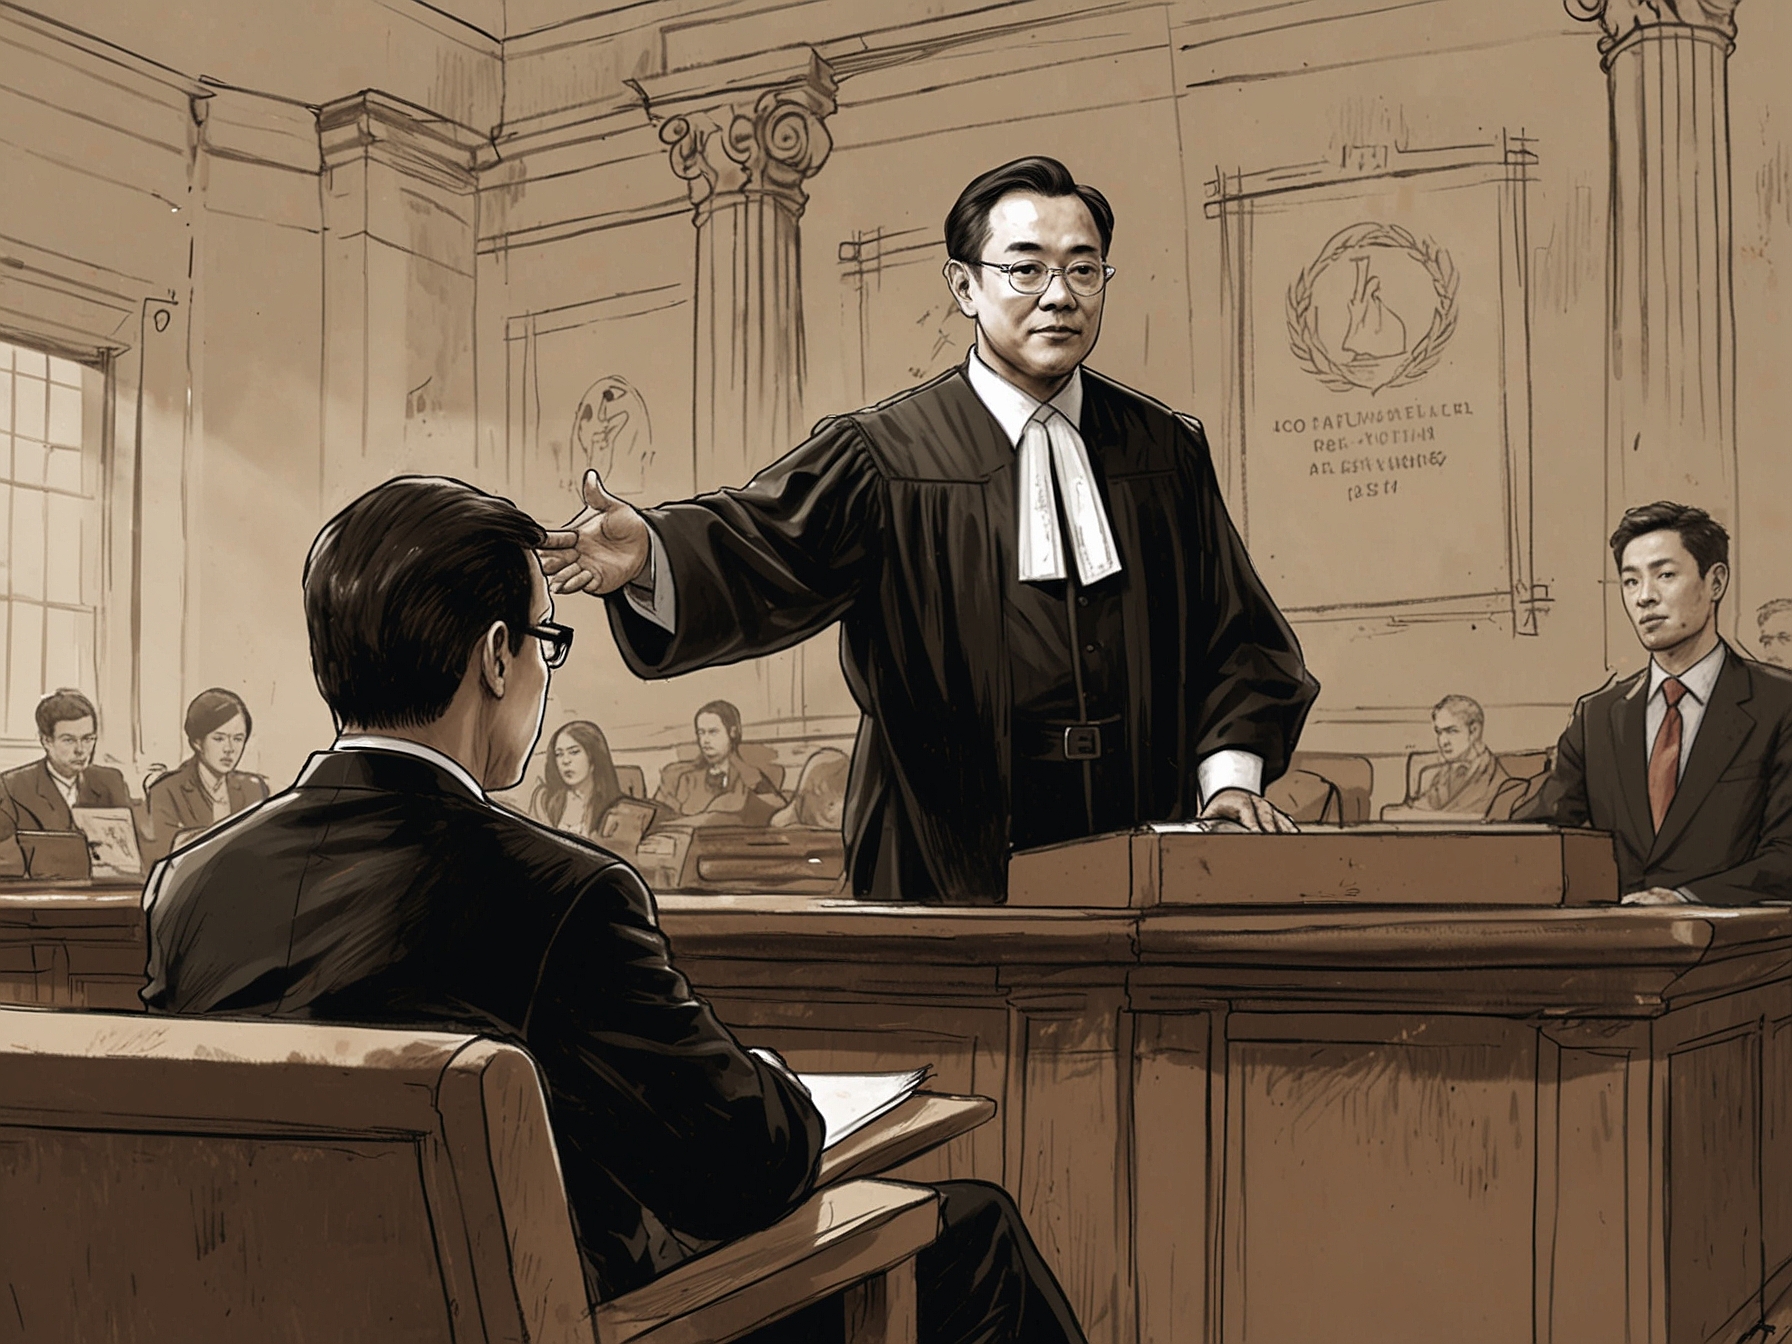 A courtroom sketch showing a judge delivering a ruling, with representations of Binance's logo and Changpeng Zhao, indicating the significant legal battle faced by the crypto giant.